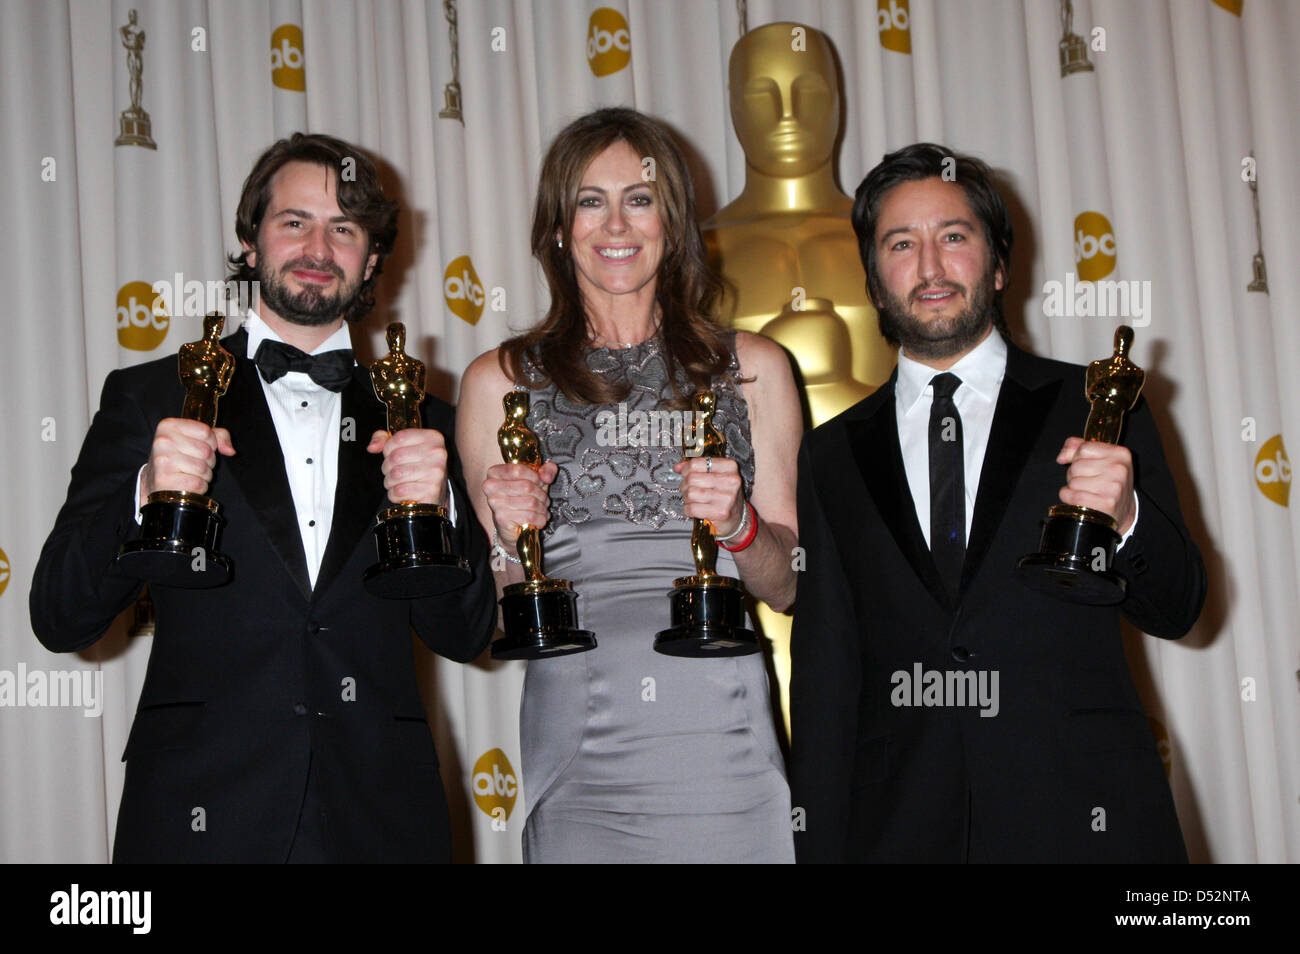 (L-R) Screenwriter Mark Boal, US director Kathryn Bigelow and producer Greg Shapiro hold their Oscars at the 82nd Annual Academy Awards at the Kodak Theater in Hollywood, USA, 07 March 2010. They won the Oscar for Best Picture with the movie 'The Hurt Locker'. The Oscars are awarded for outstanding individual or collective efforts in filmmaking in up to 25 categories. Photo: HUBERT Stock Photo